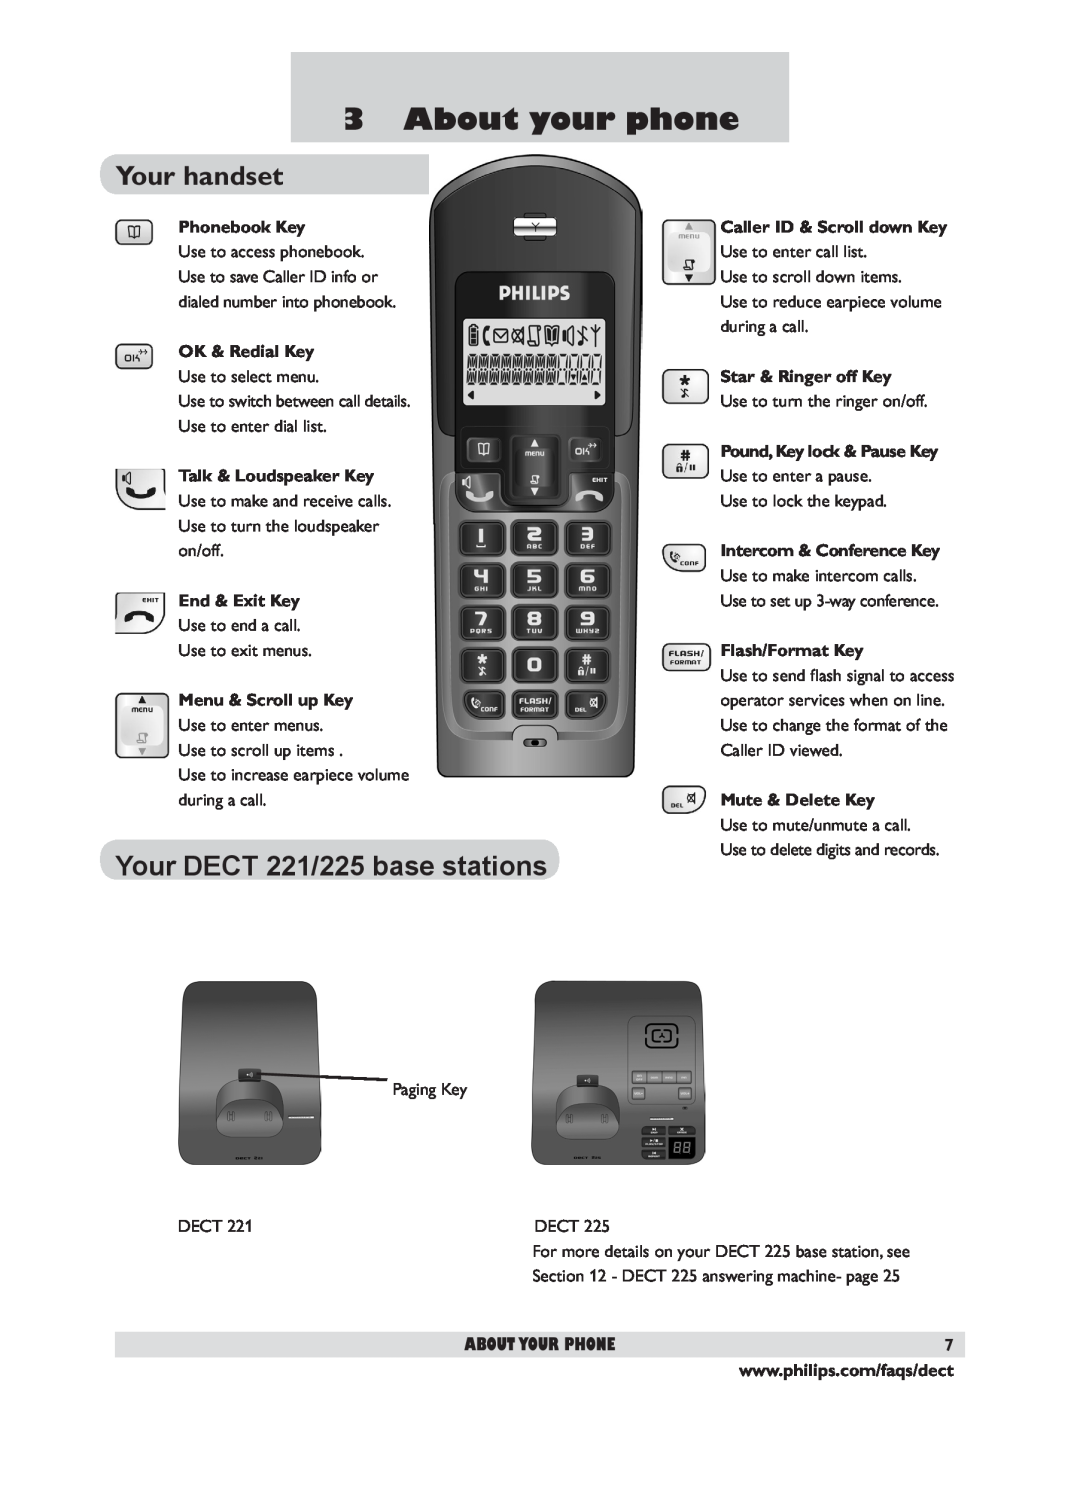 Philips user manual About your phone, Your handset, Your DECT 221/225 base stations 